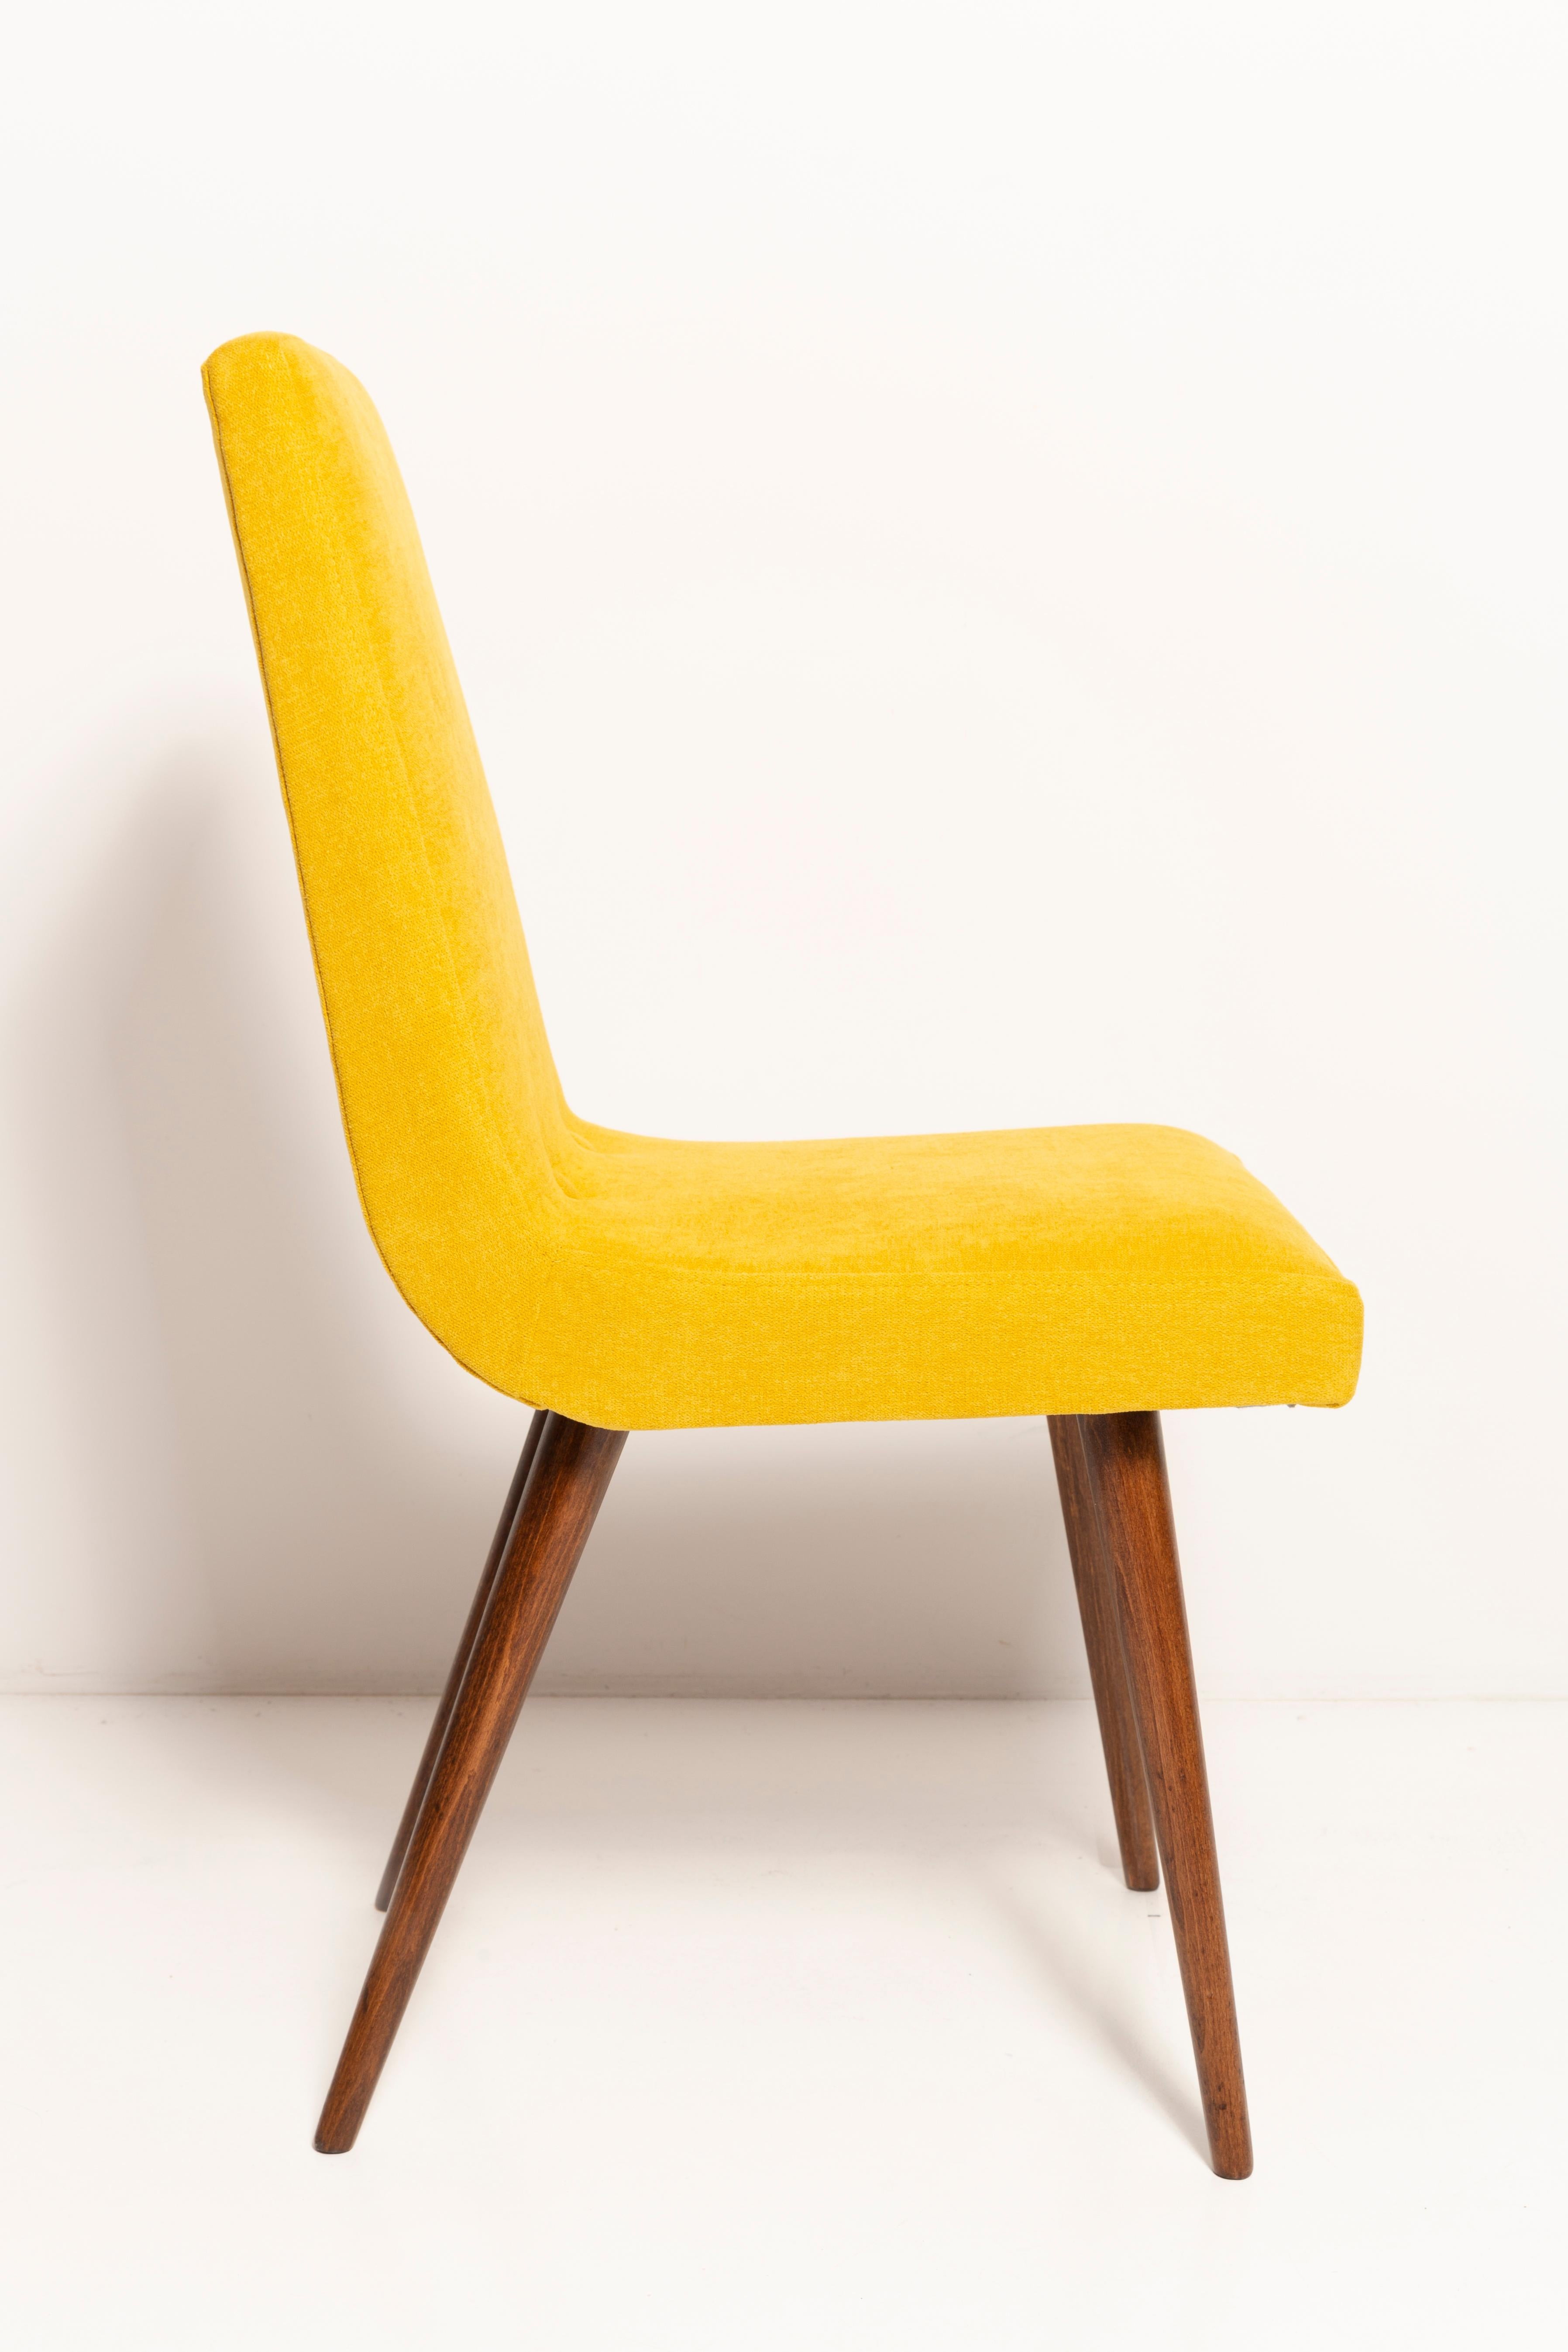 Hand-Crafted Set of Eight 20th Century Mustard Yellow Wool Chair, Rajmund Halas Europe, 1960s For Sale